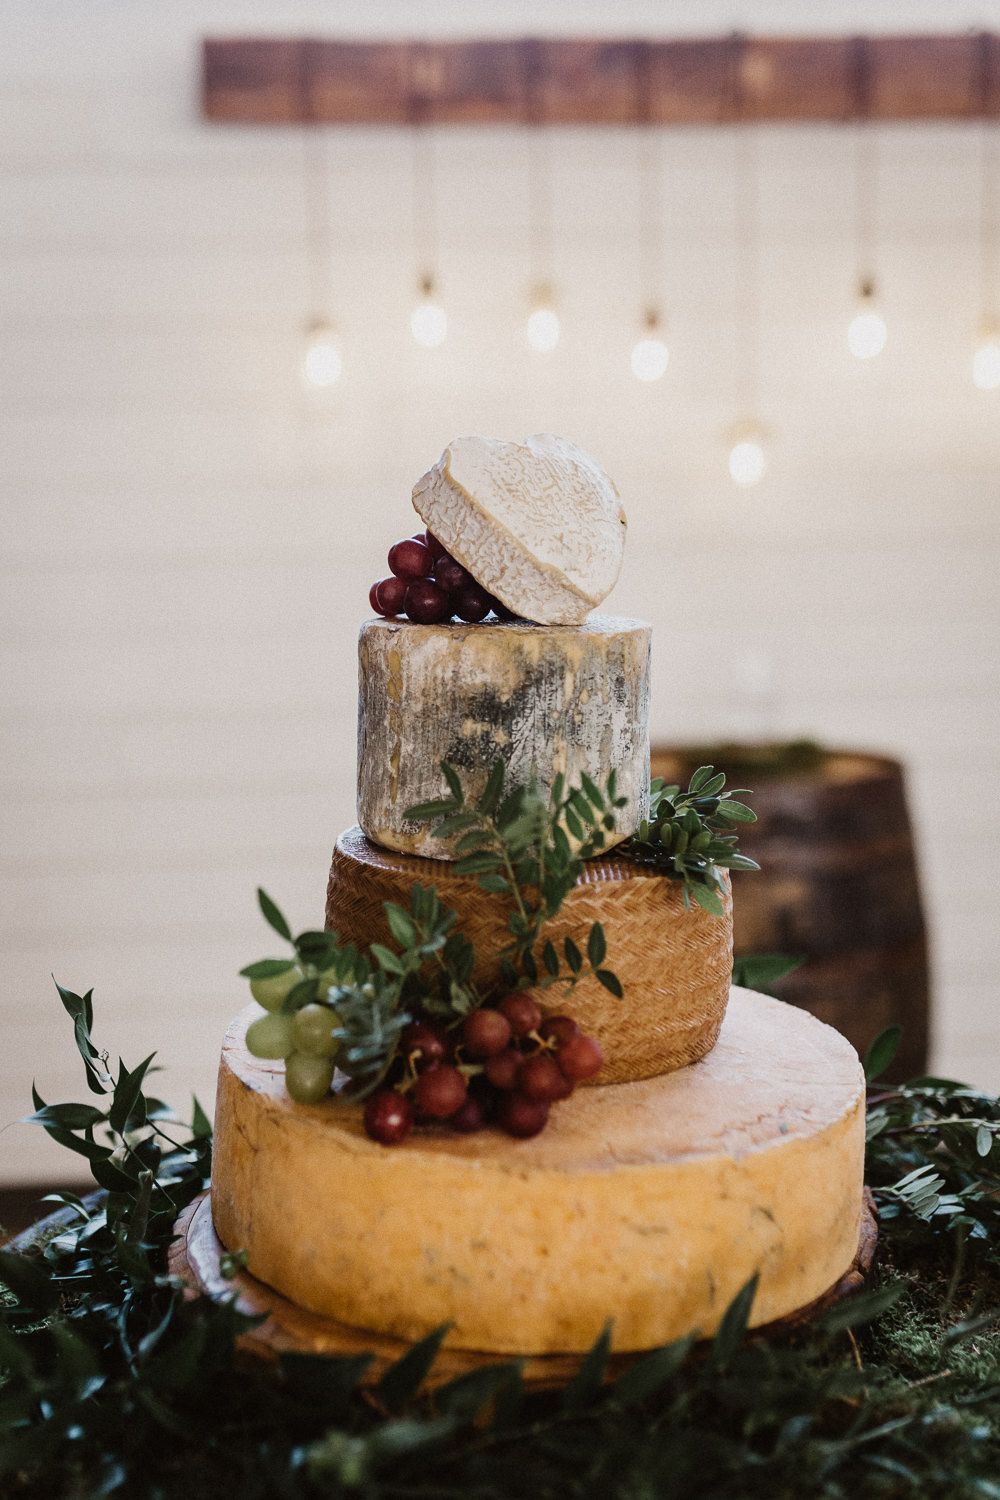 Wedding Planning Etiquette: The Do's And Don'ts Of Choosing A Cheese Wedding Cake - Cheese Wedding Cake shop